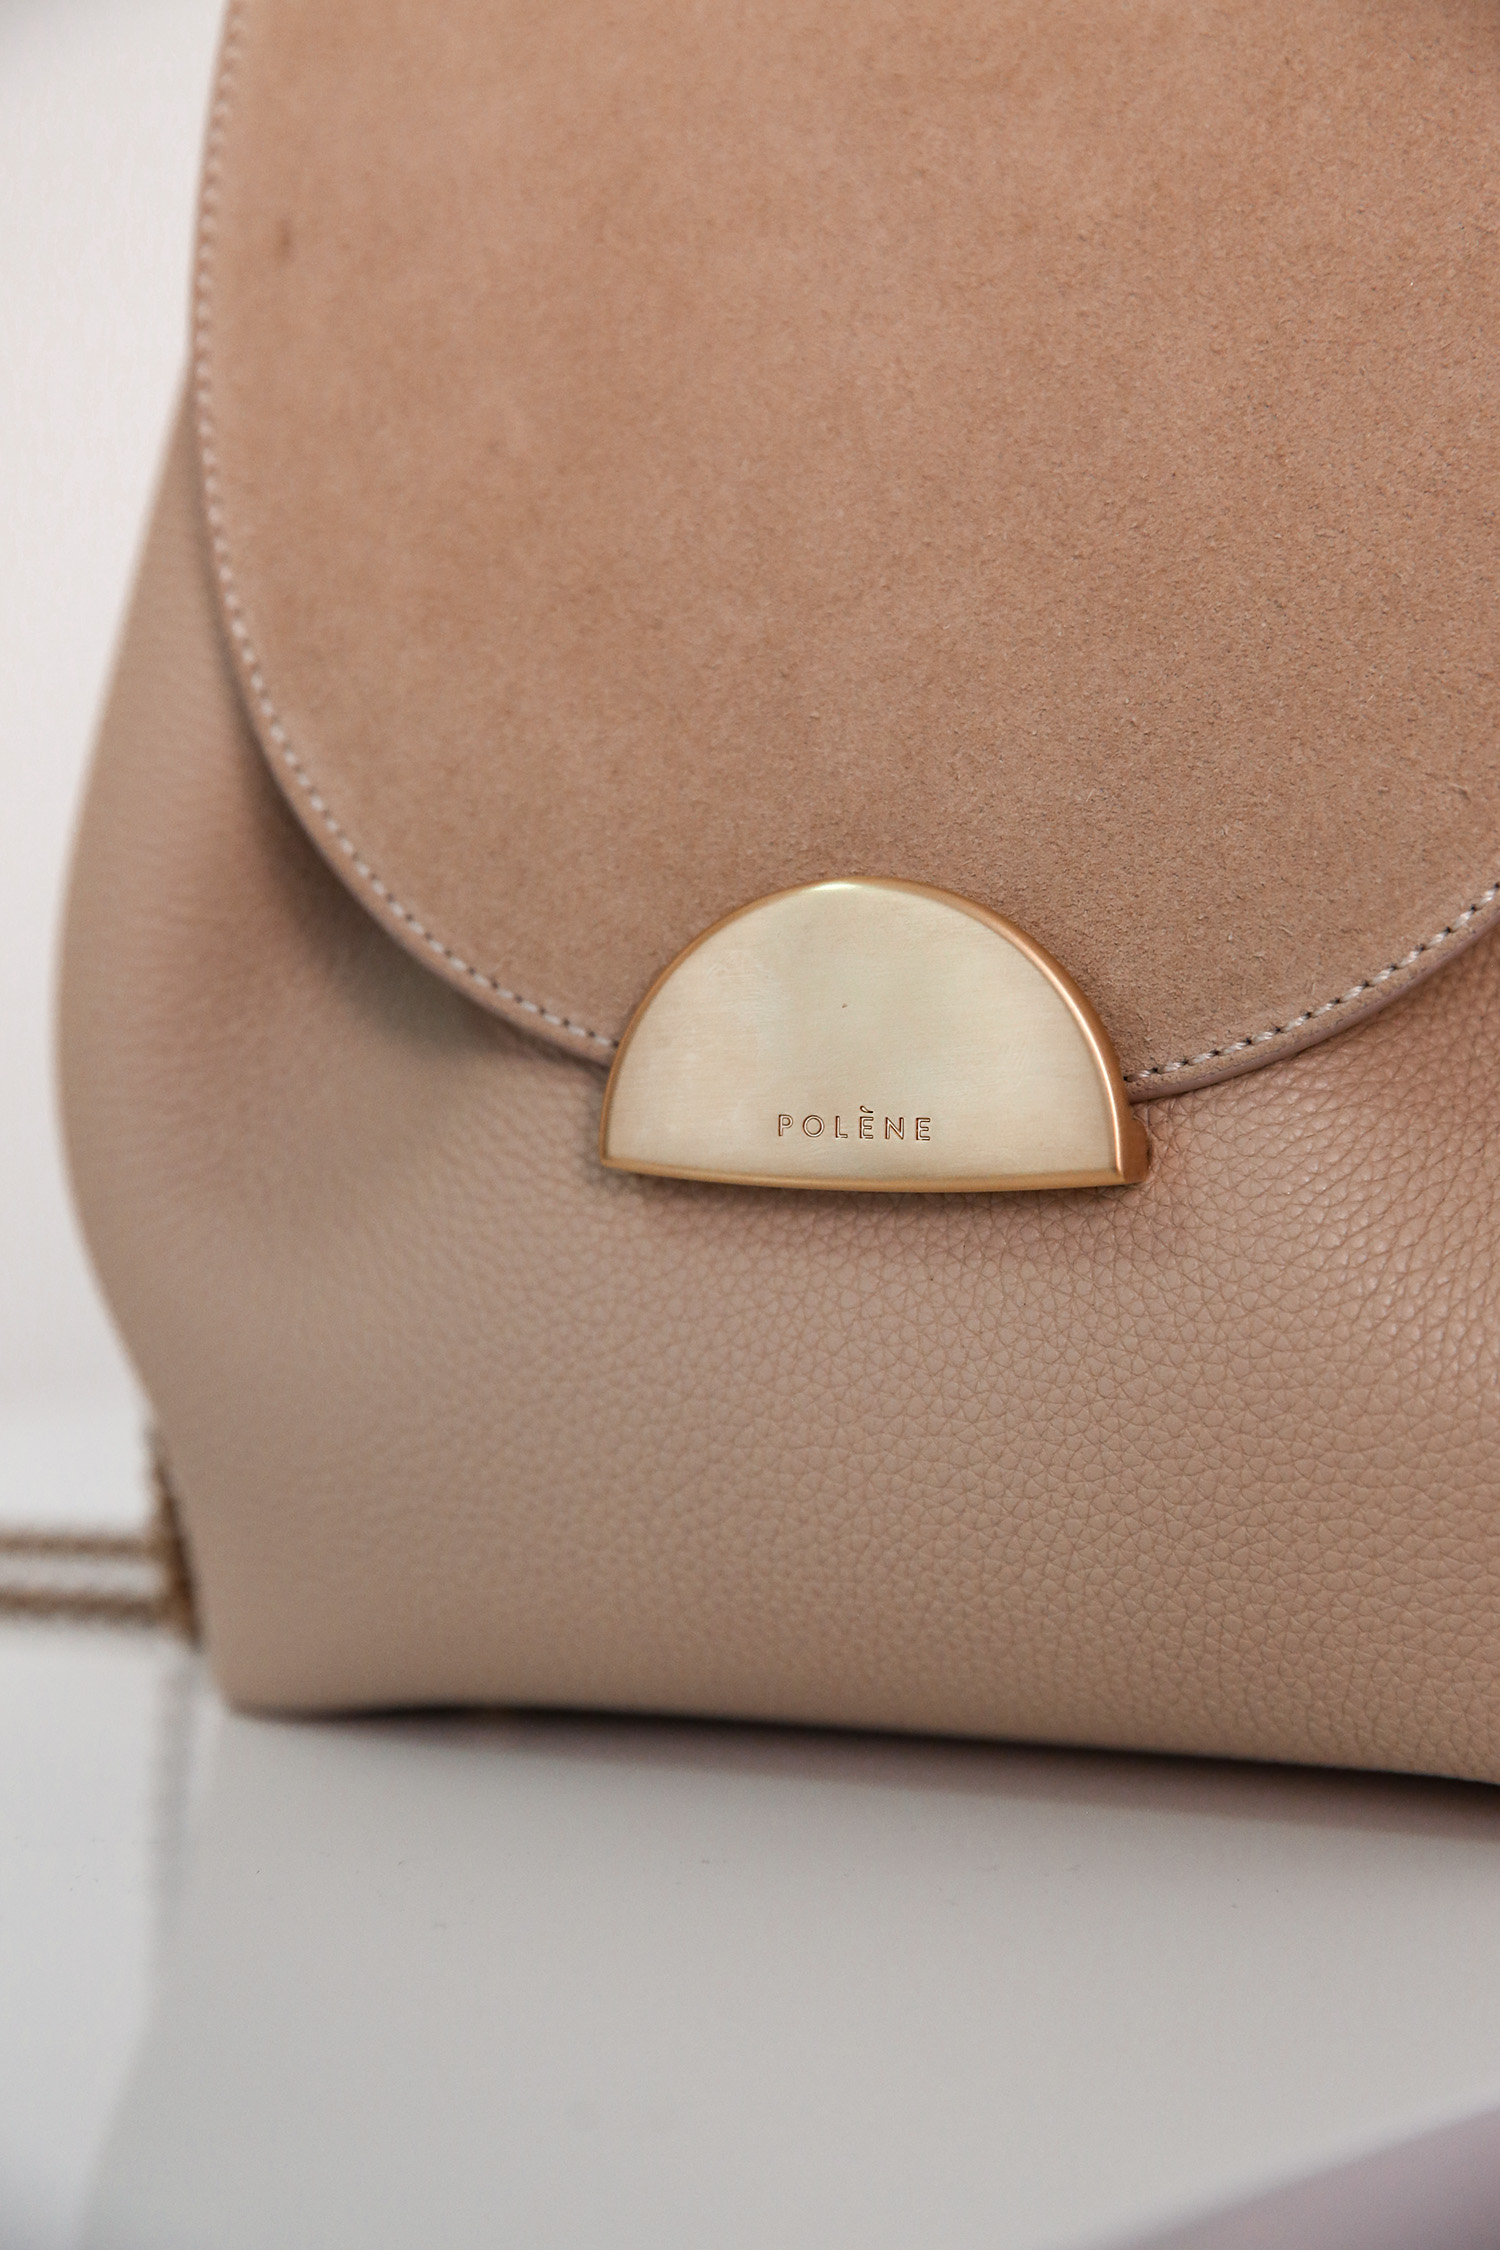 Polene Number One Mini Bag Review